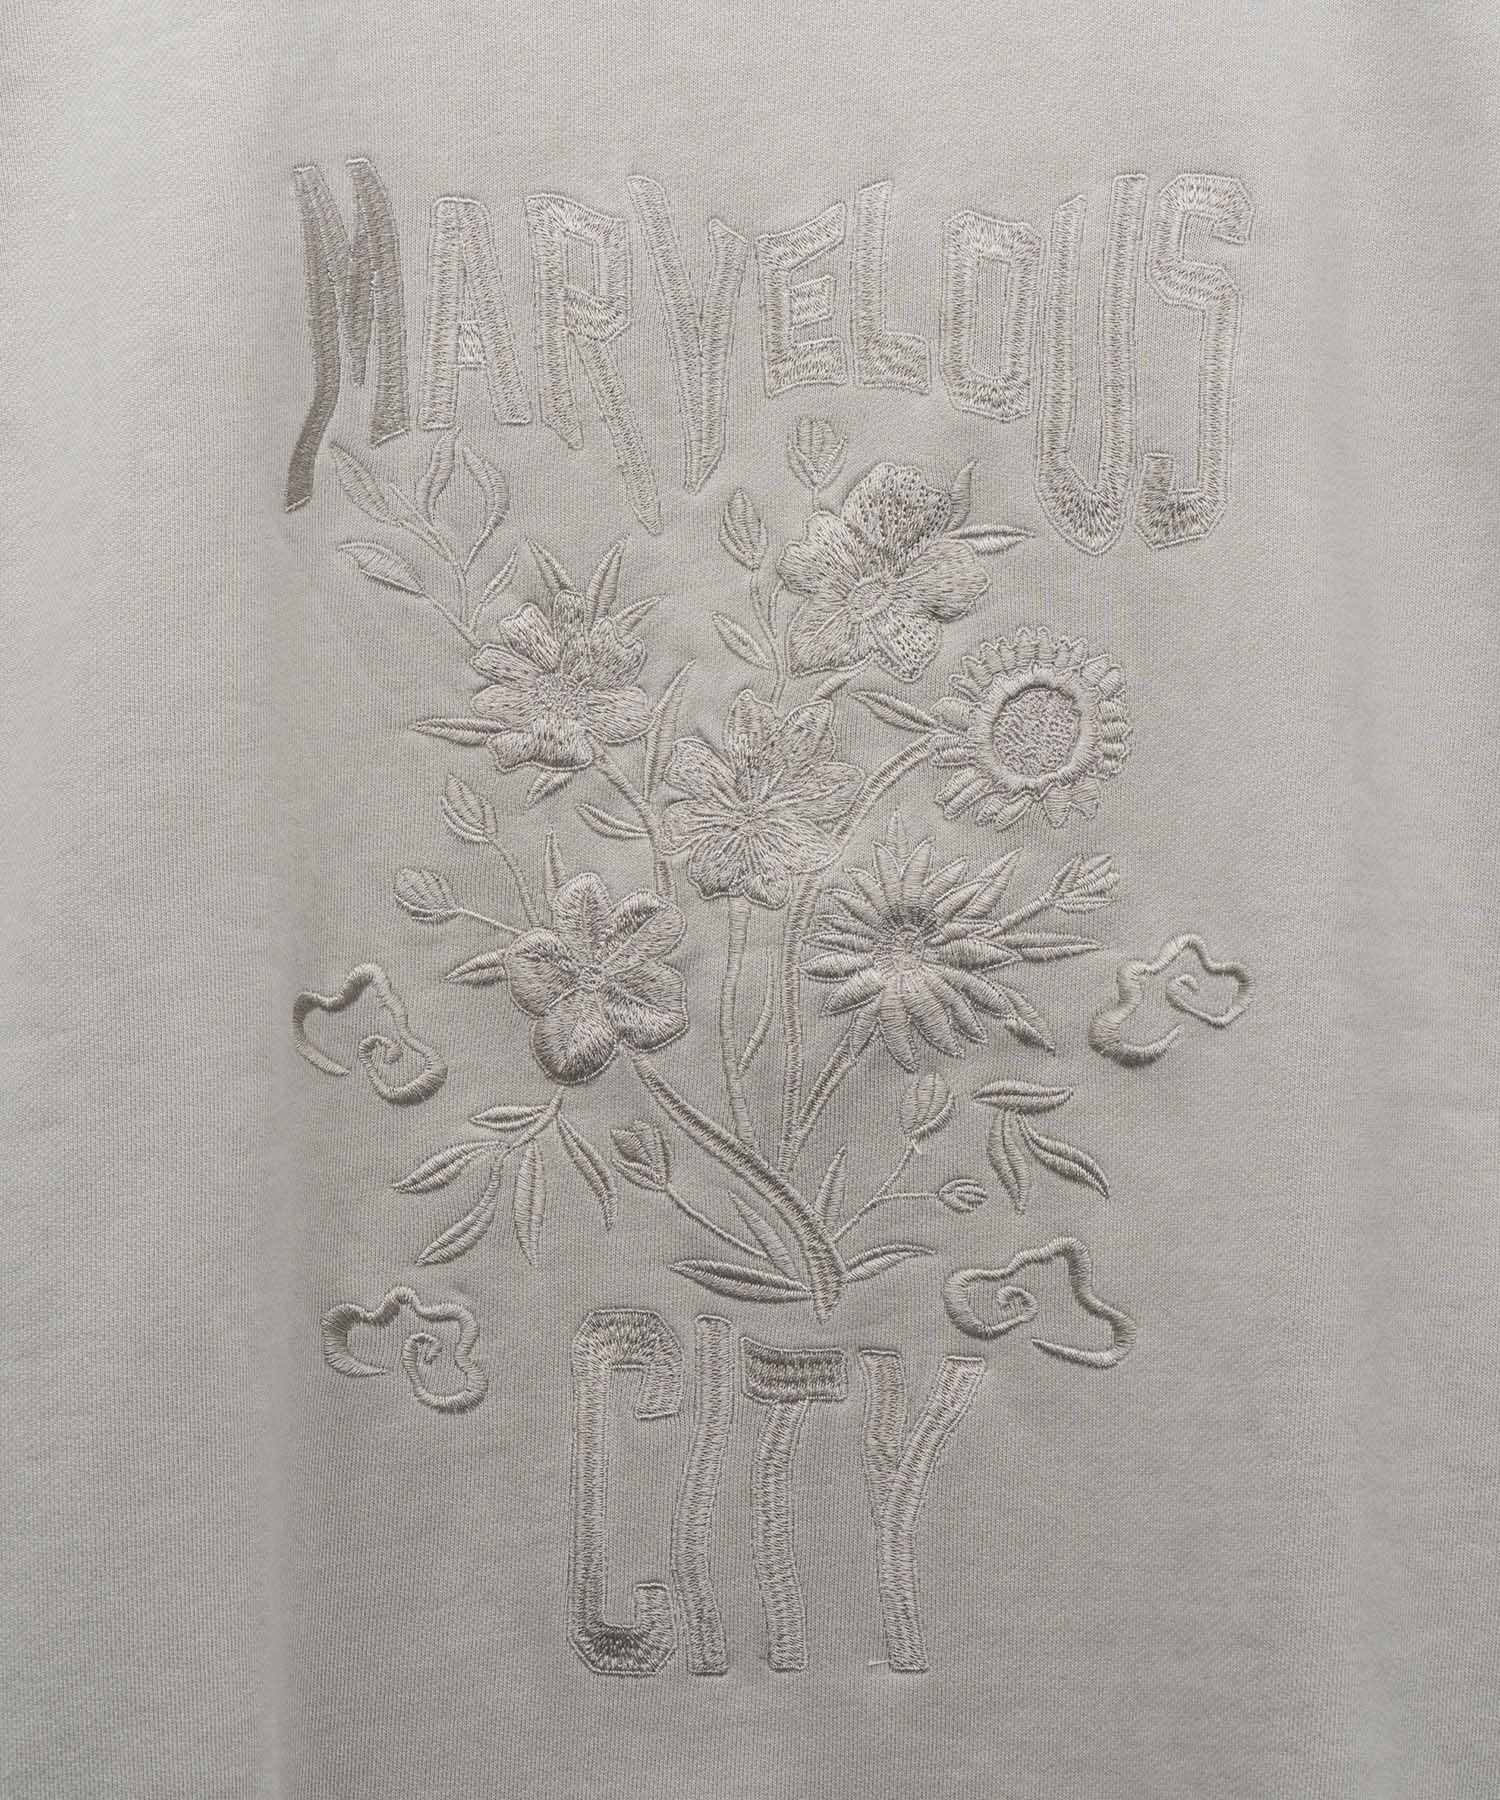 Prime-Over Flower Embroidery Pigment Crew Neck Sweat Pullover